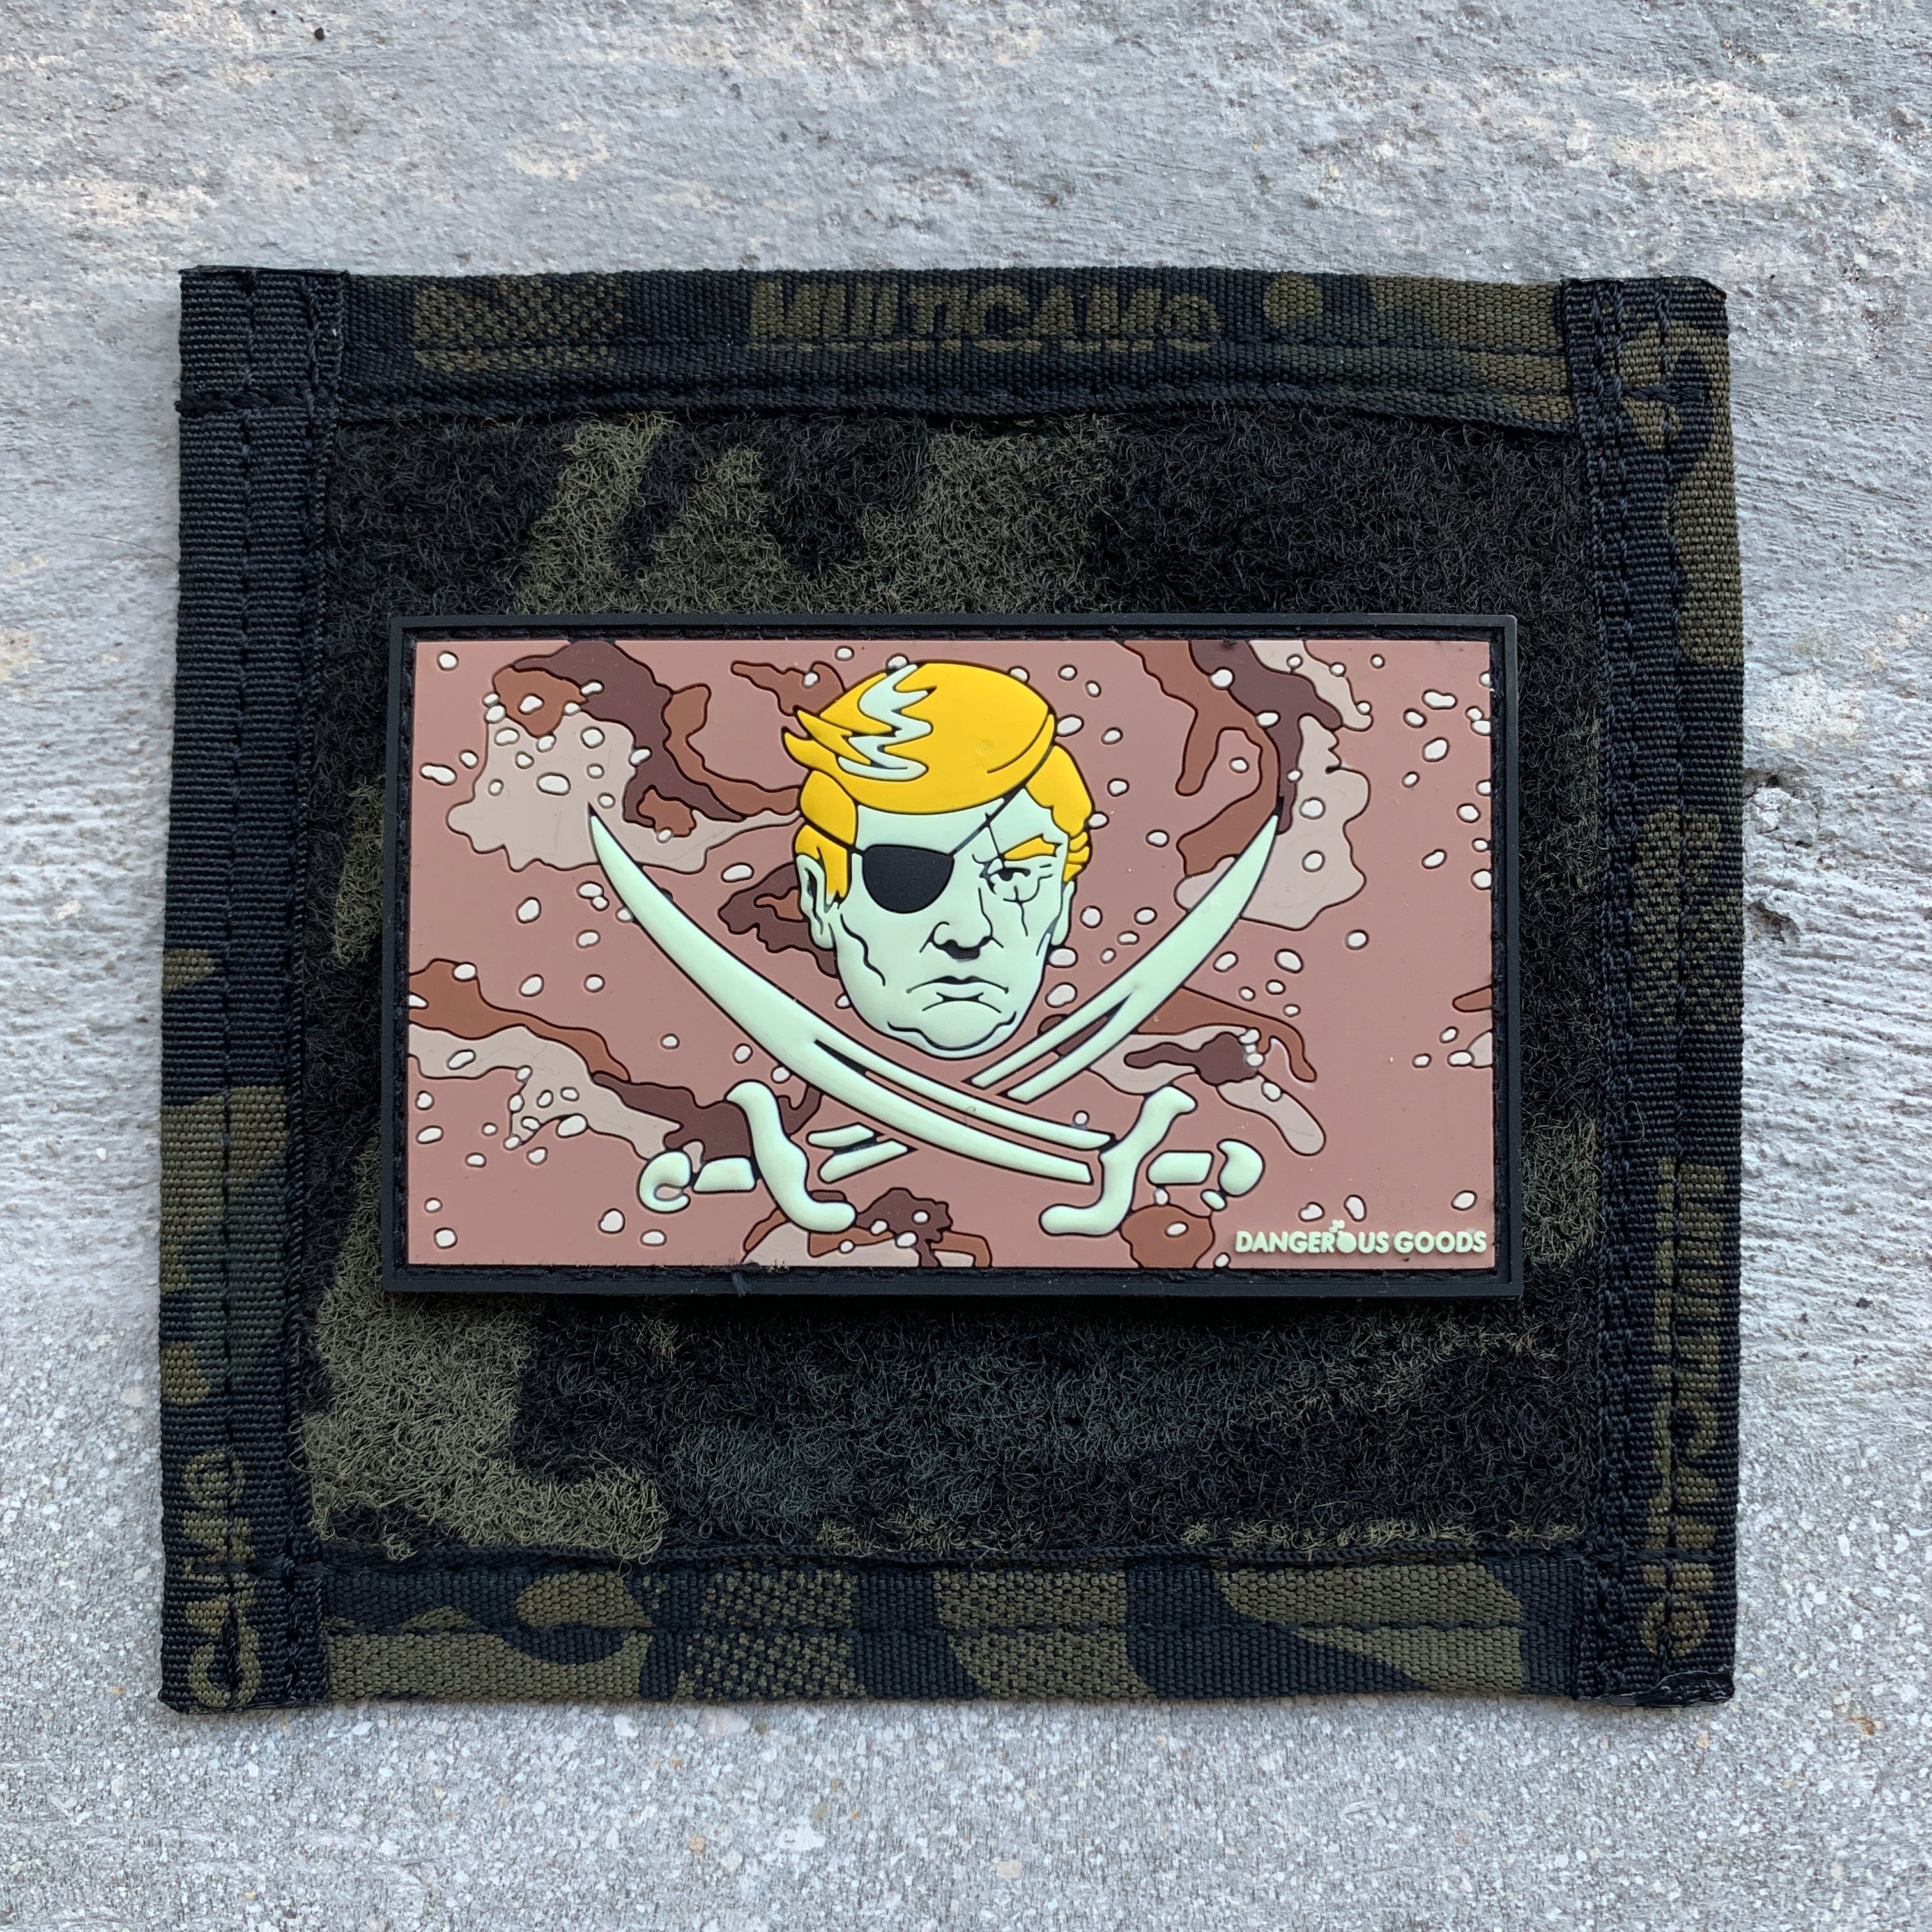 Tan desert storm style camo pvc rubber patch depicting a cartoon image of trumps head with two crossing pirate swords underneath 